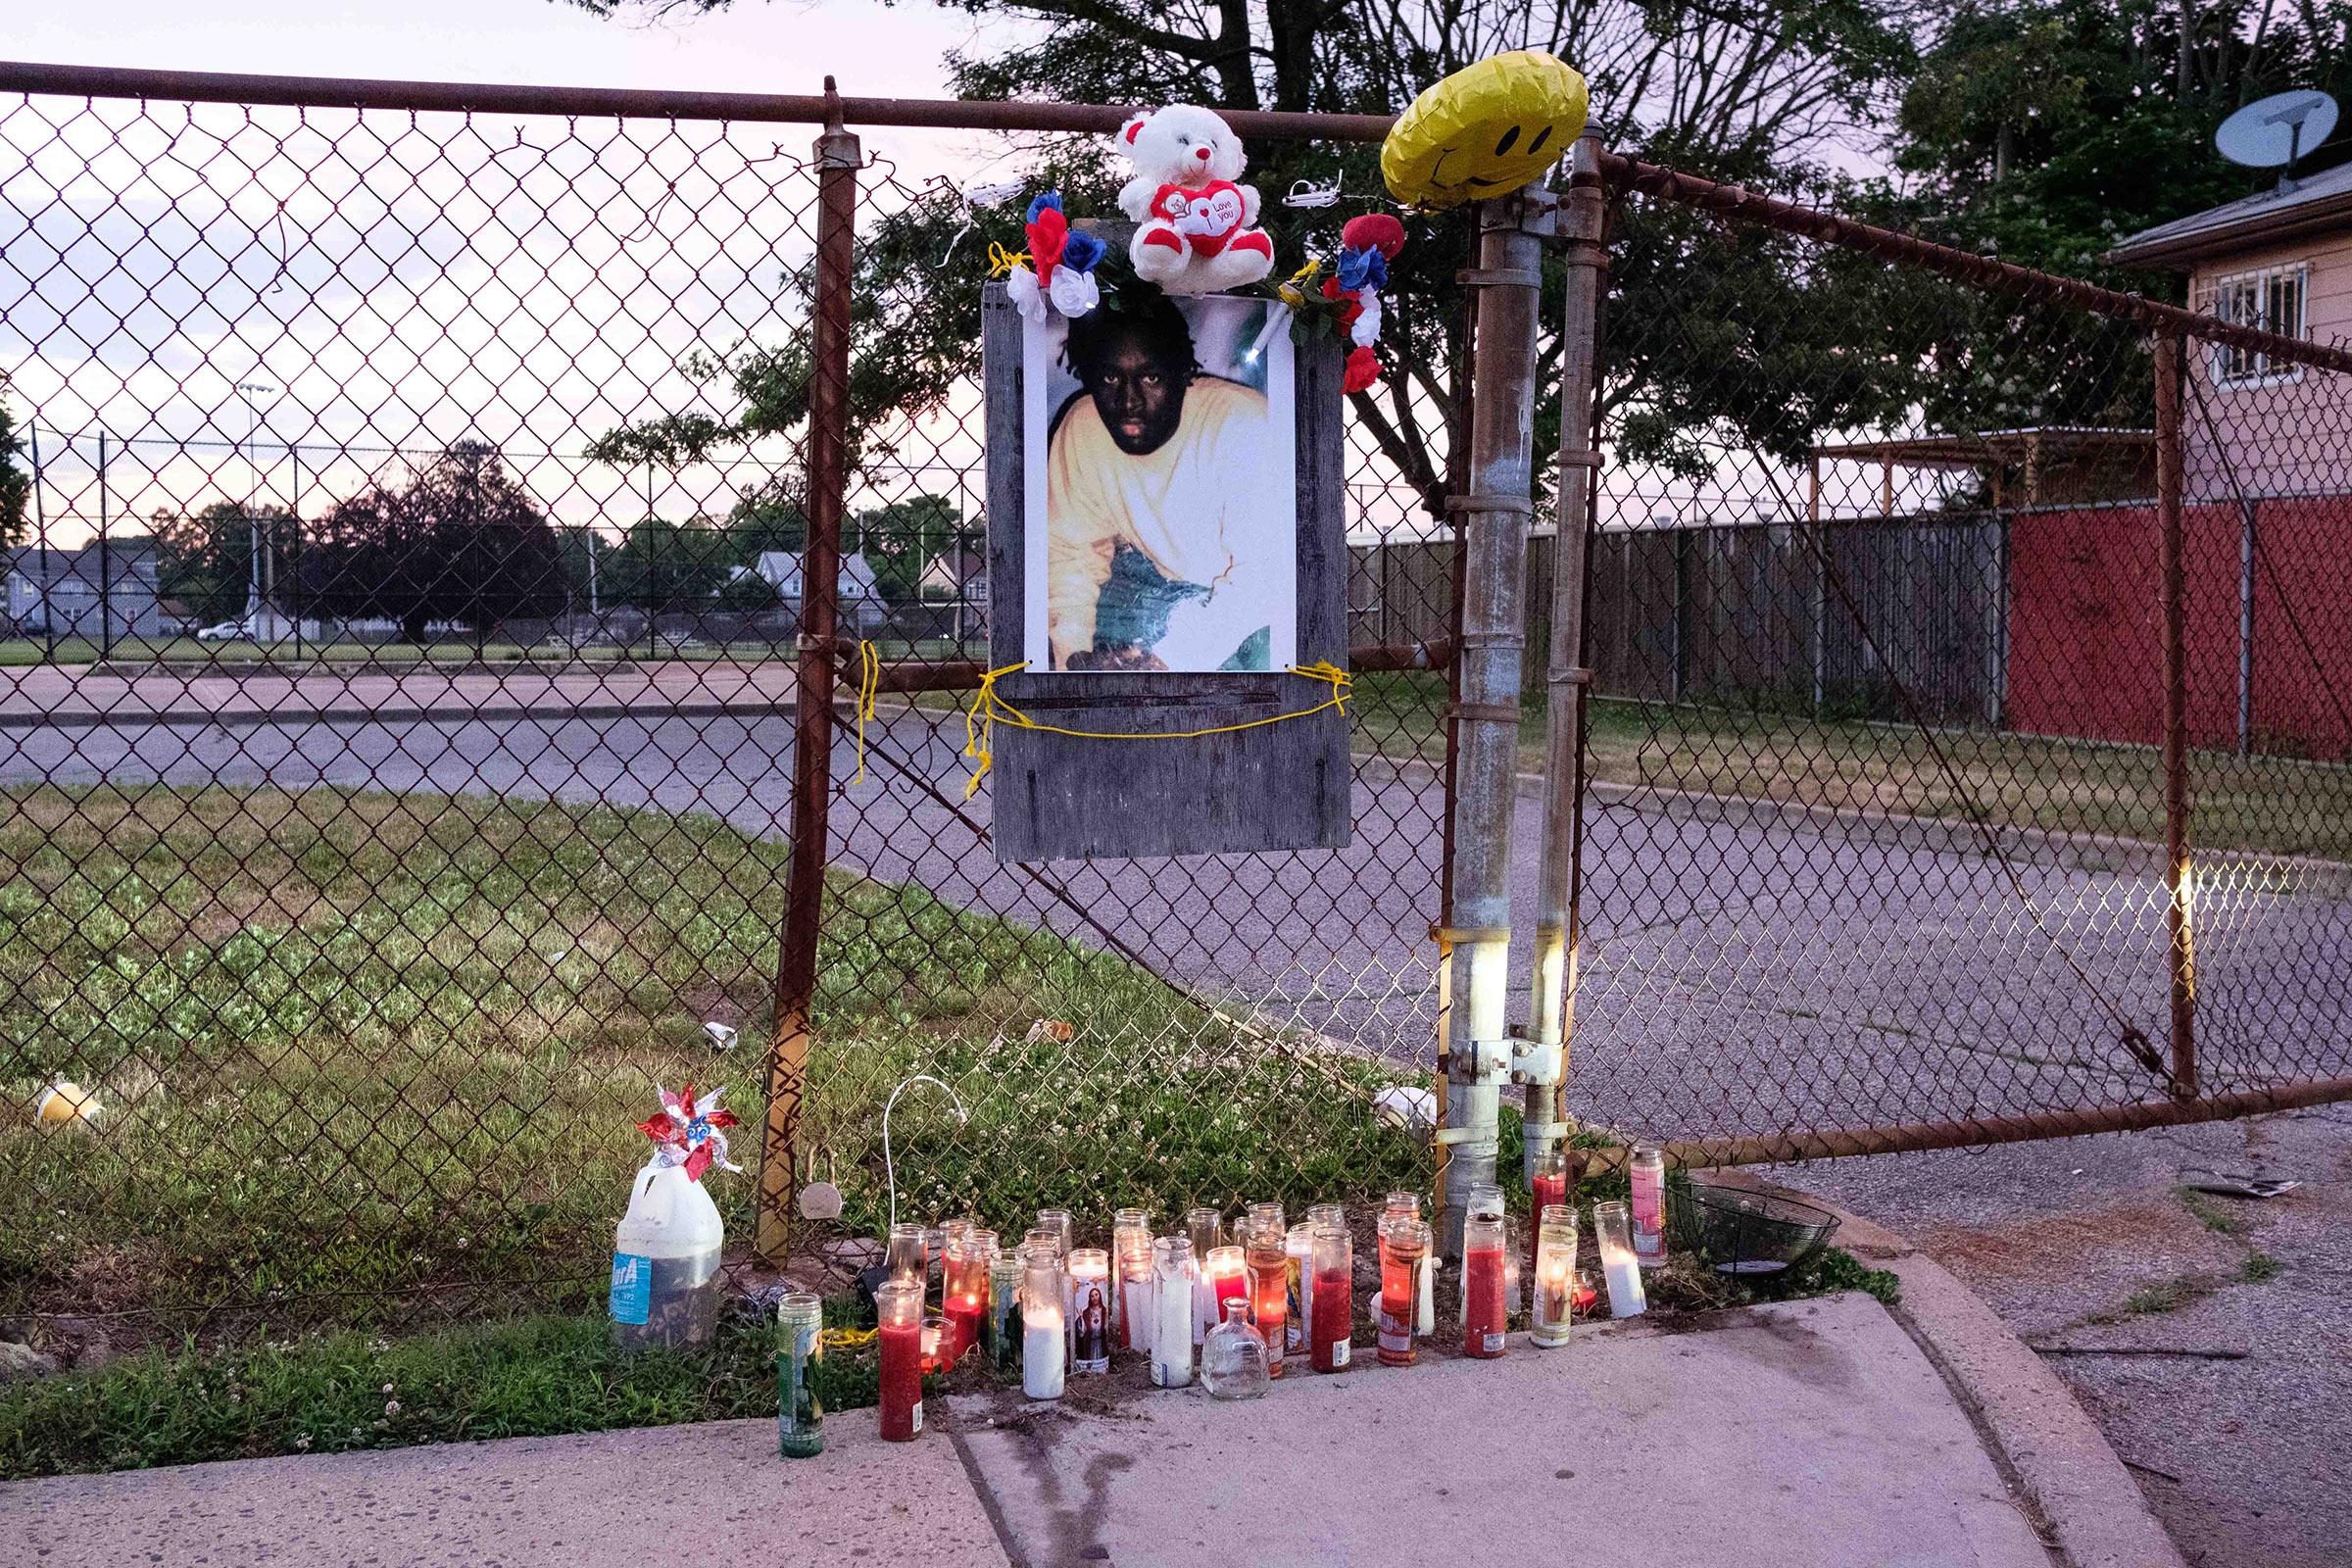 A memorial, in honor of Jamel Floyd, is placed at Kennedy Memorial Park in Hempstead, N.Y., where Jamel grew up playing baseball.